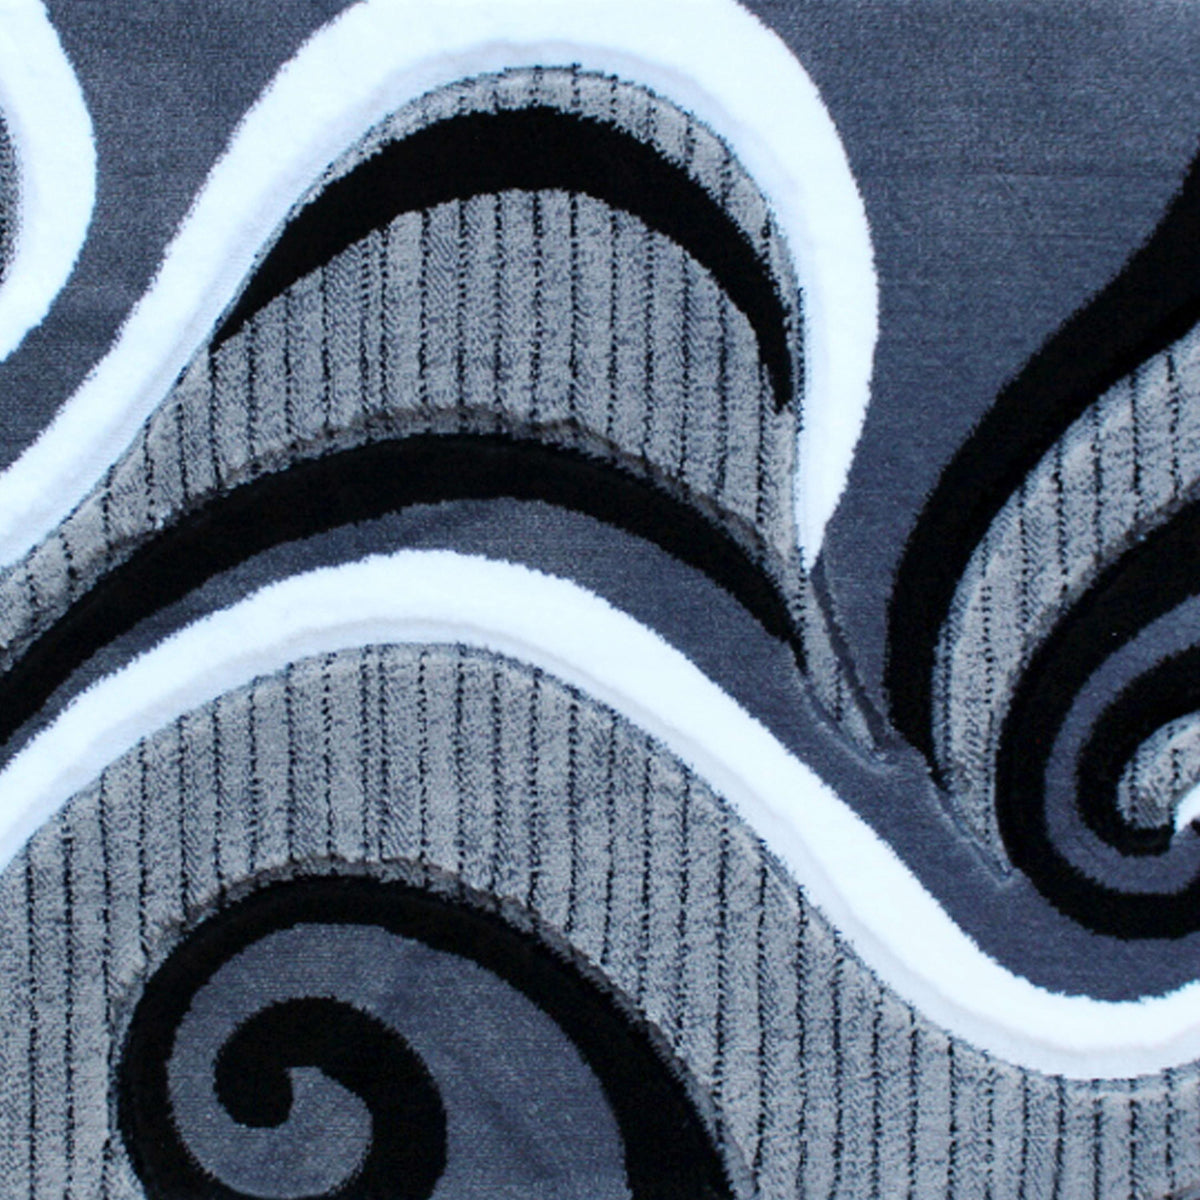 Grey,2' x 3' |#| Modern High-Low Sculpted Swirl Design Abstract Area Rug - Gray - 2' x 3'